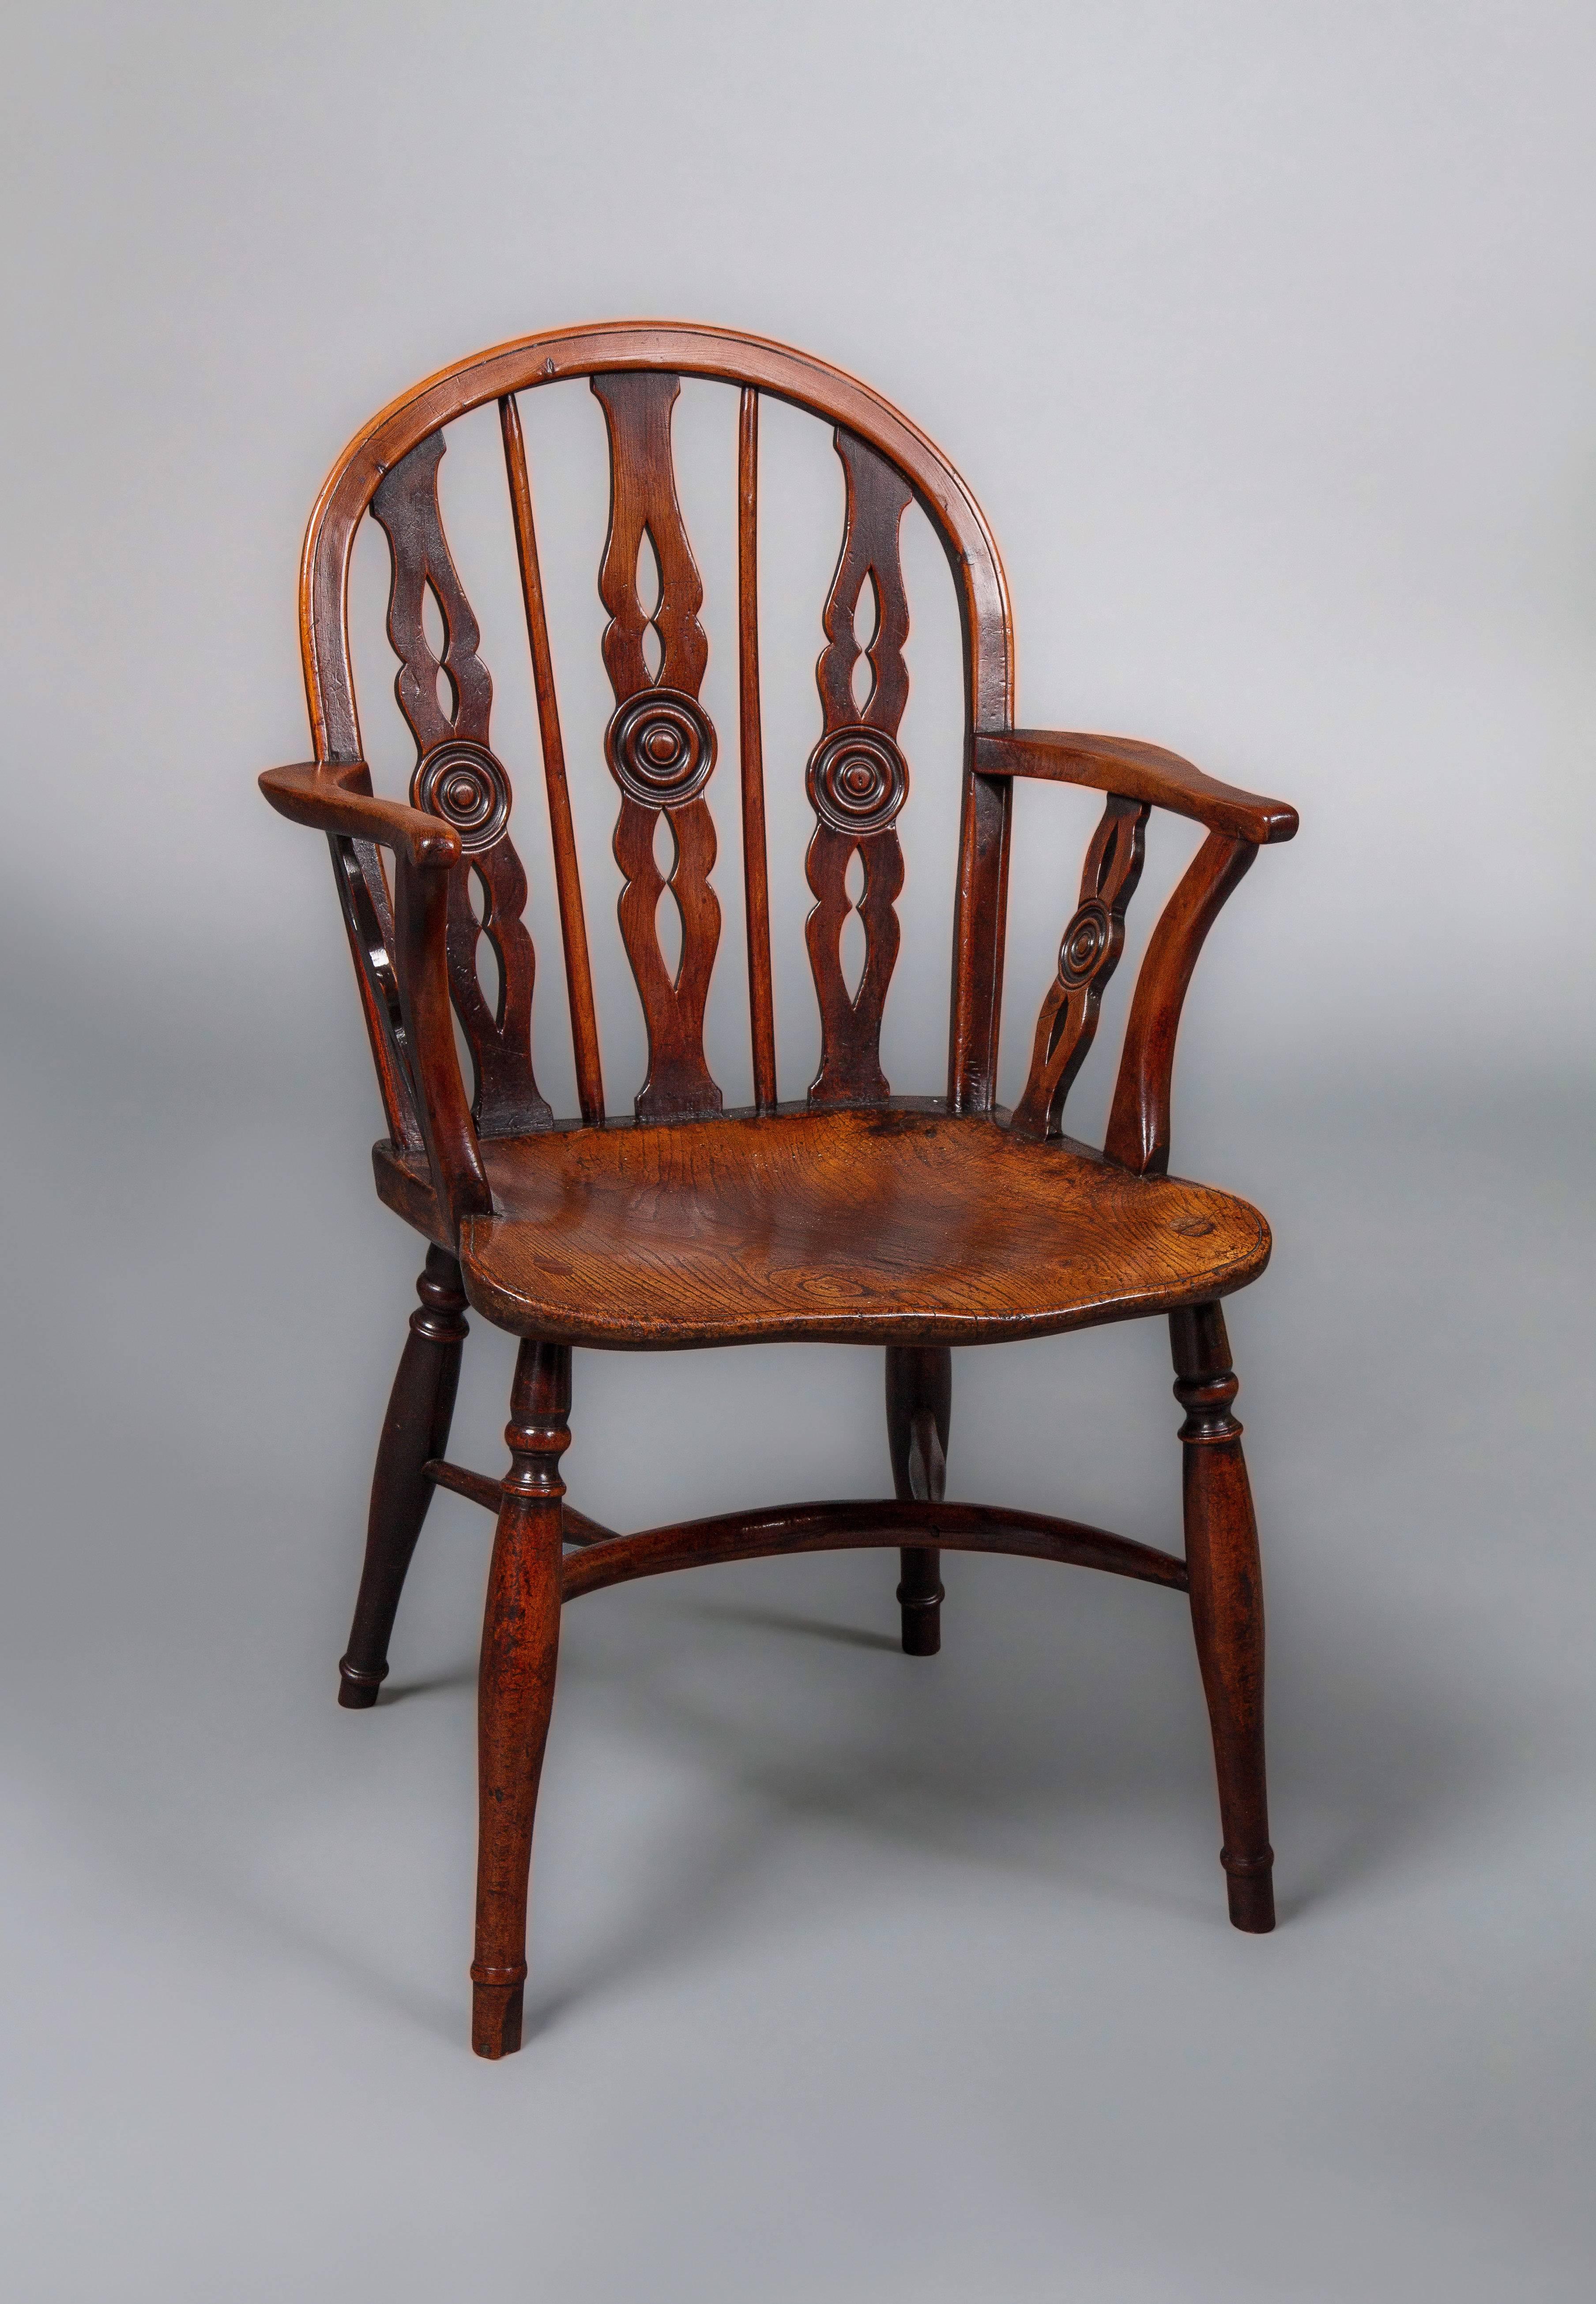 Attributed to the Prior family of Uxbridge, Middlesex In the Thames Valley, this set consists of two armchairs and six side chairs.

Each chair with a hooped back in yew wood with vertical pierced splats centered by roundels and shaped saddle seat